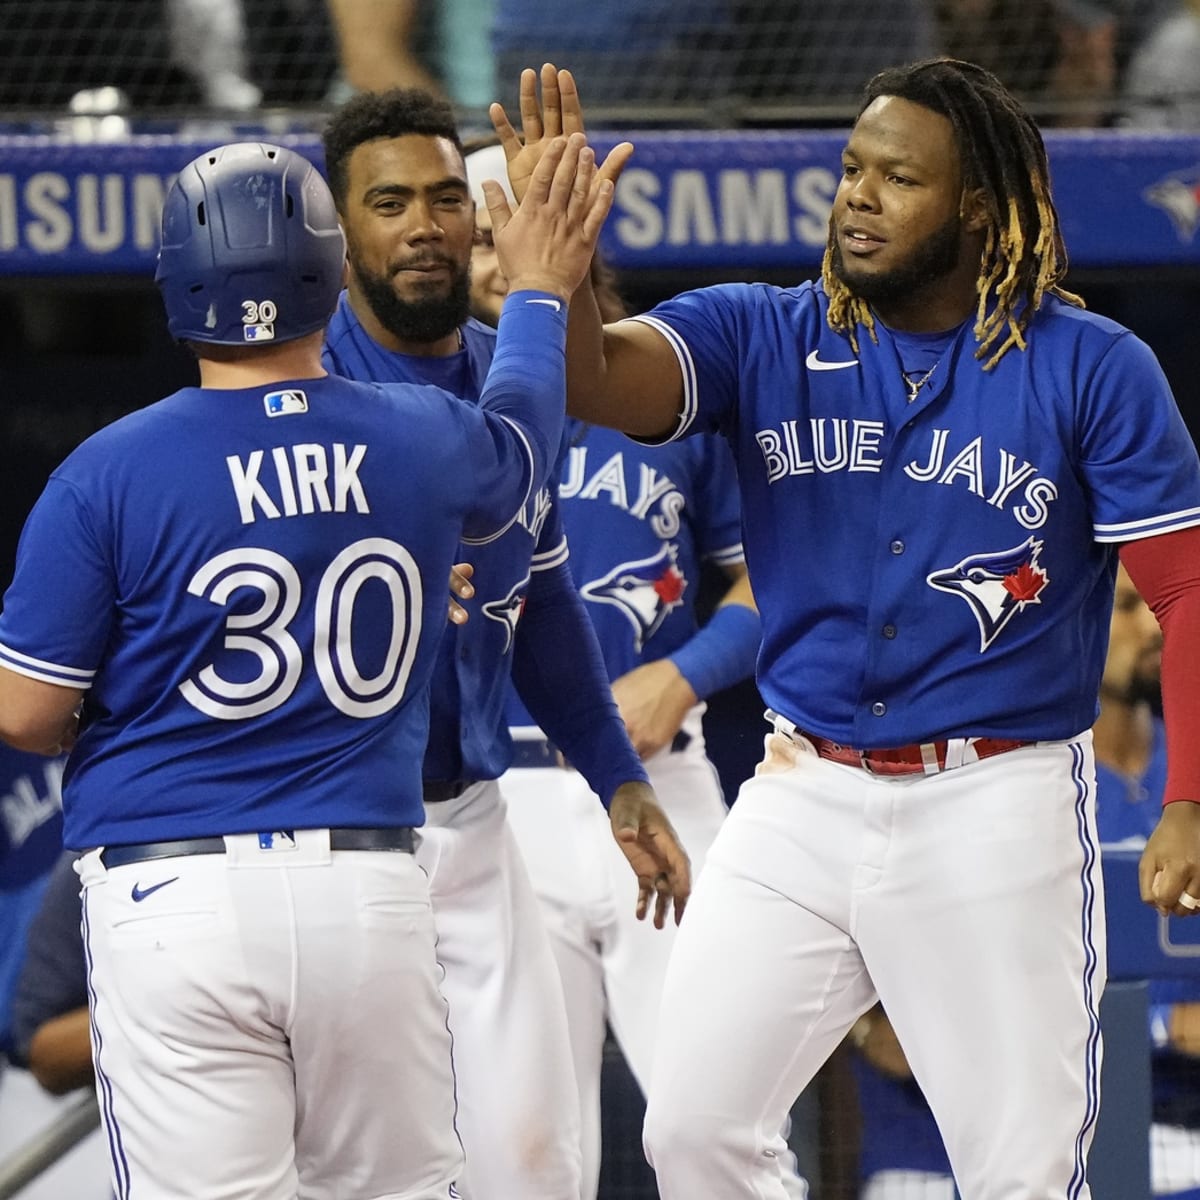 Like father, like son: Vlad Guerrero Jr. shines as All-Star